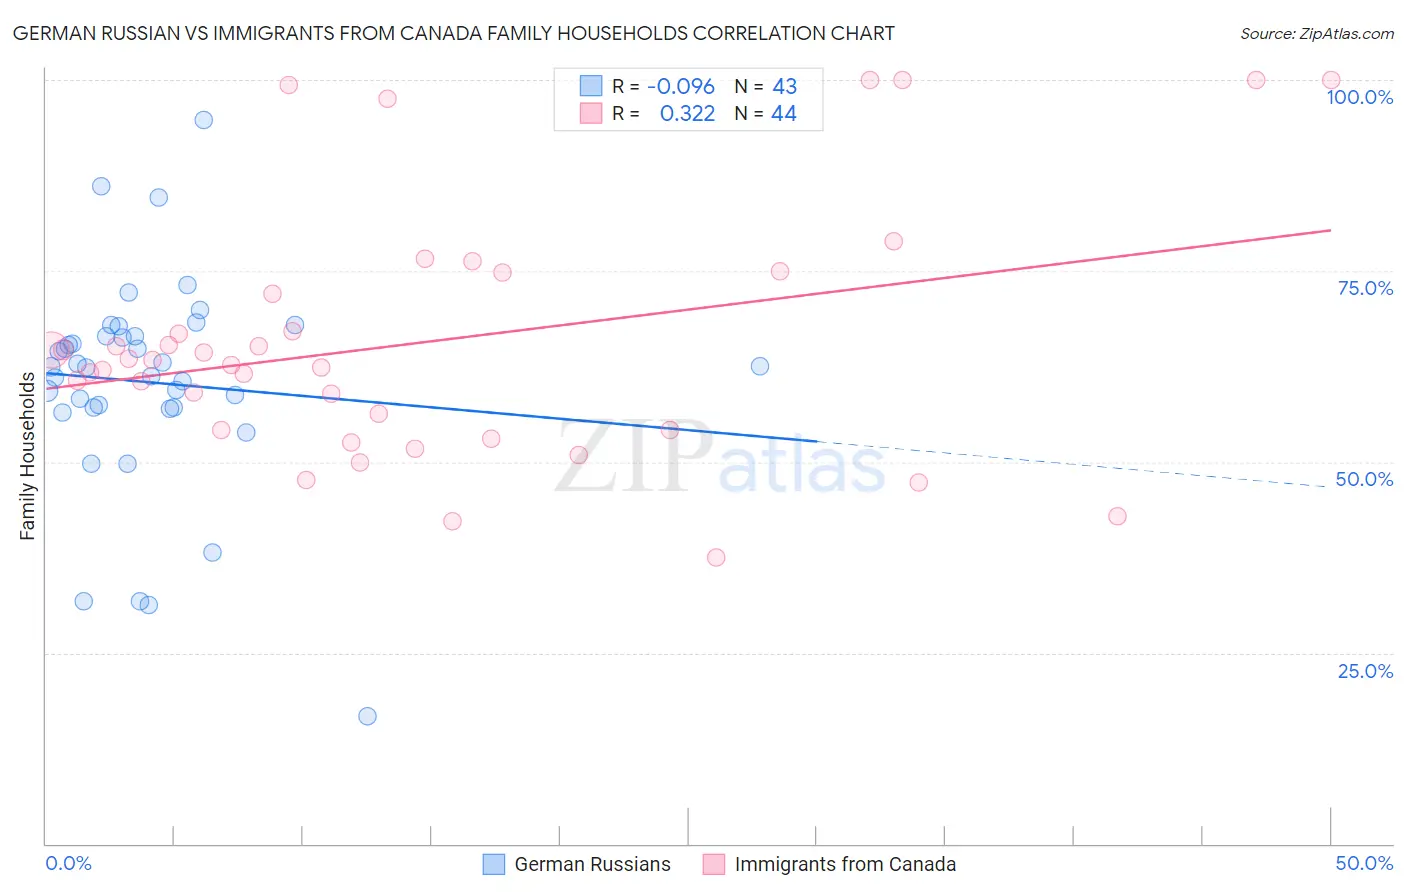 German Russian vs Immigrants from Canada Family Households